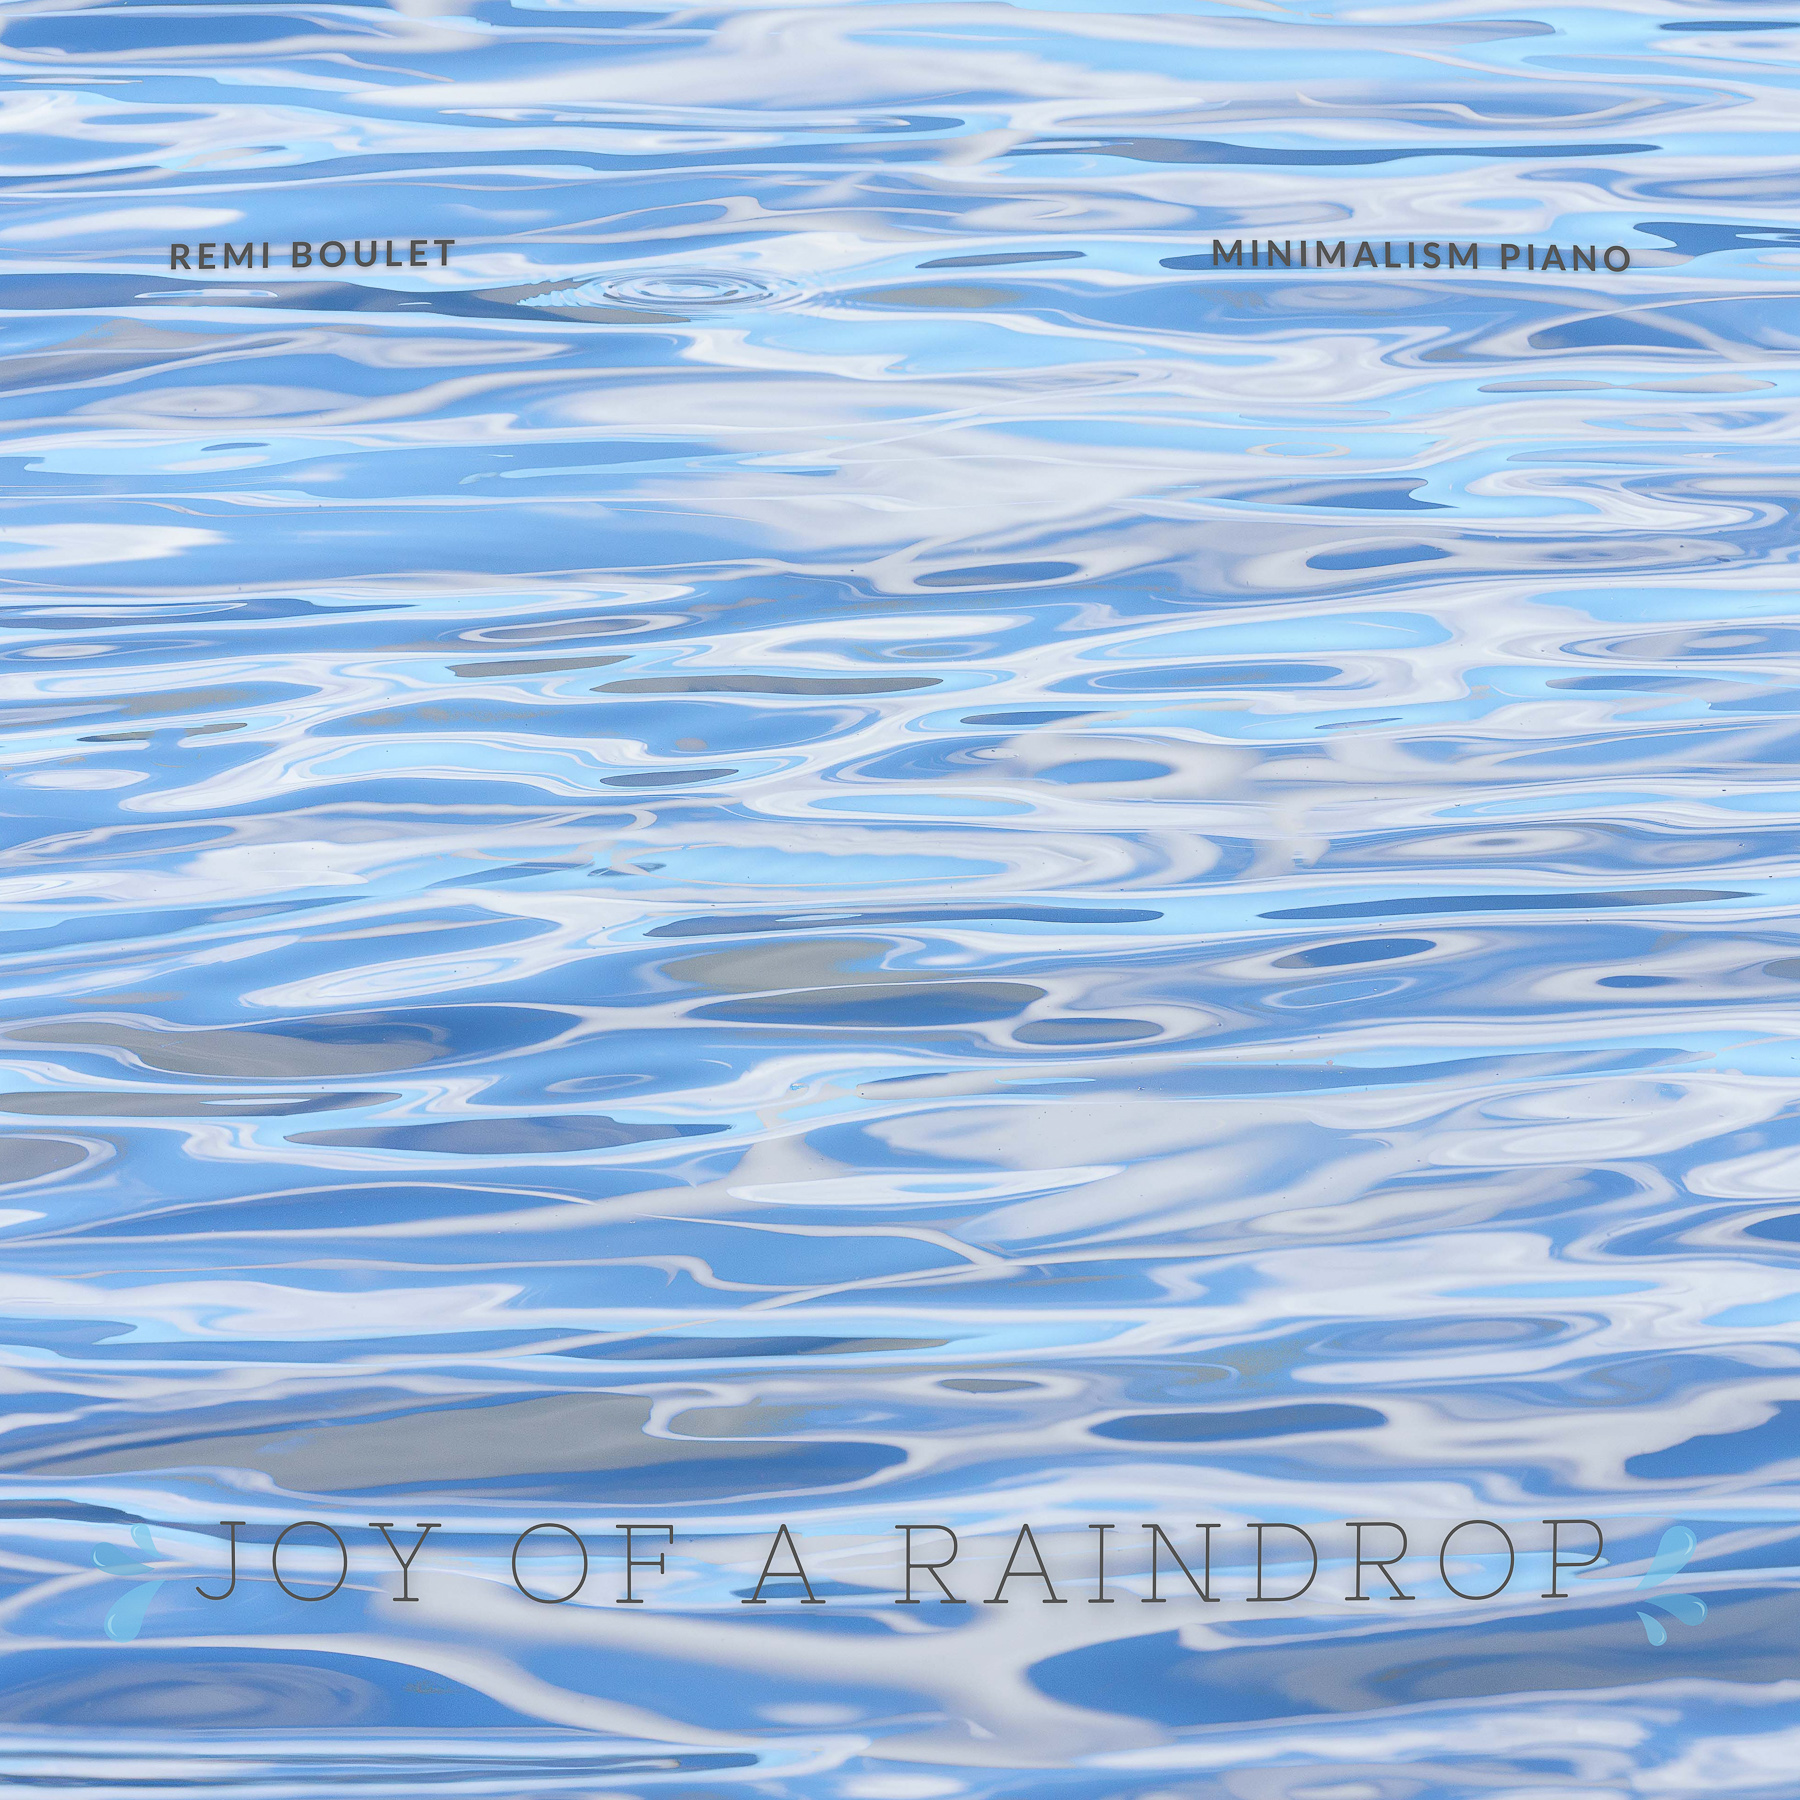 An abstract water ripple photo with a water droplet splash used for cool album cover art.